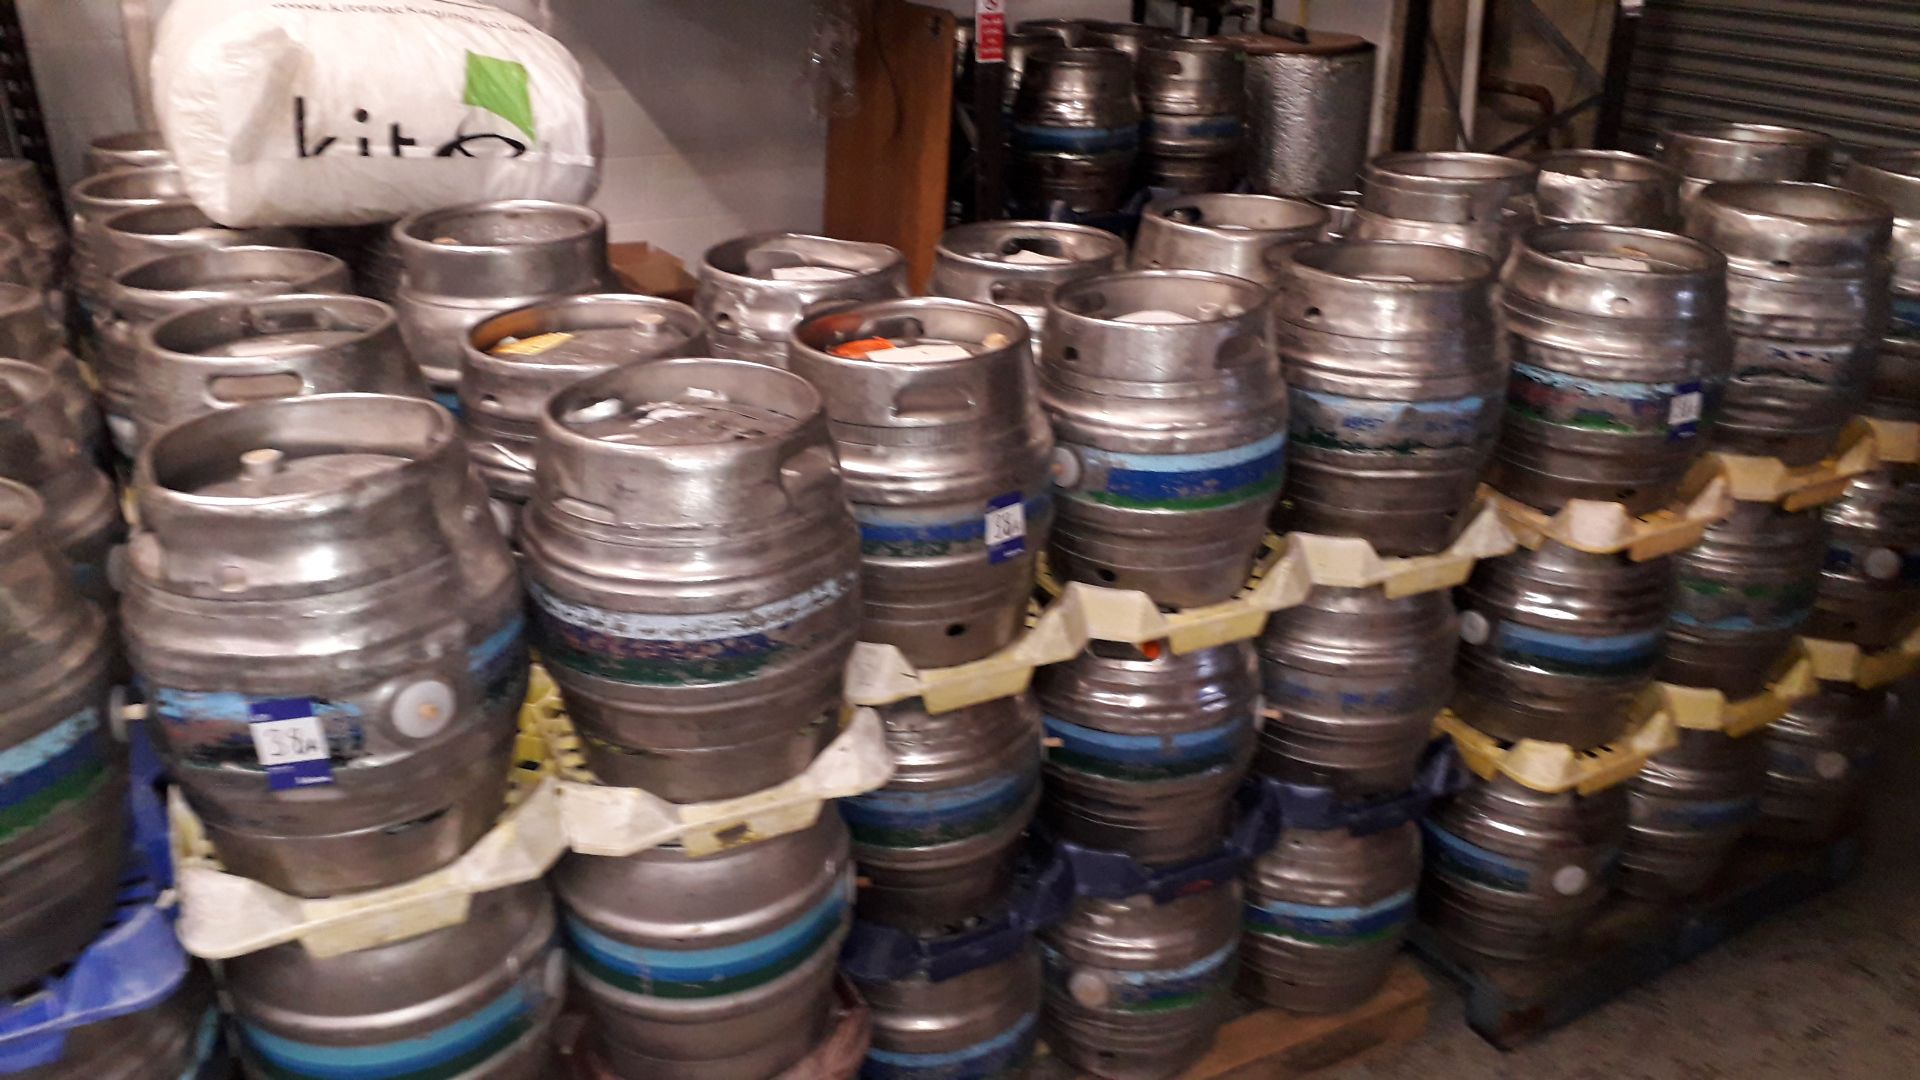 Approx. 110 x 9 Gallon Stainless Steel Beer Kegs and Quantity of Keg Pallets - Image 2 of 4